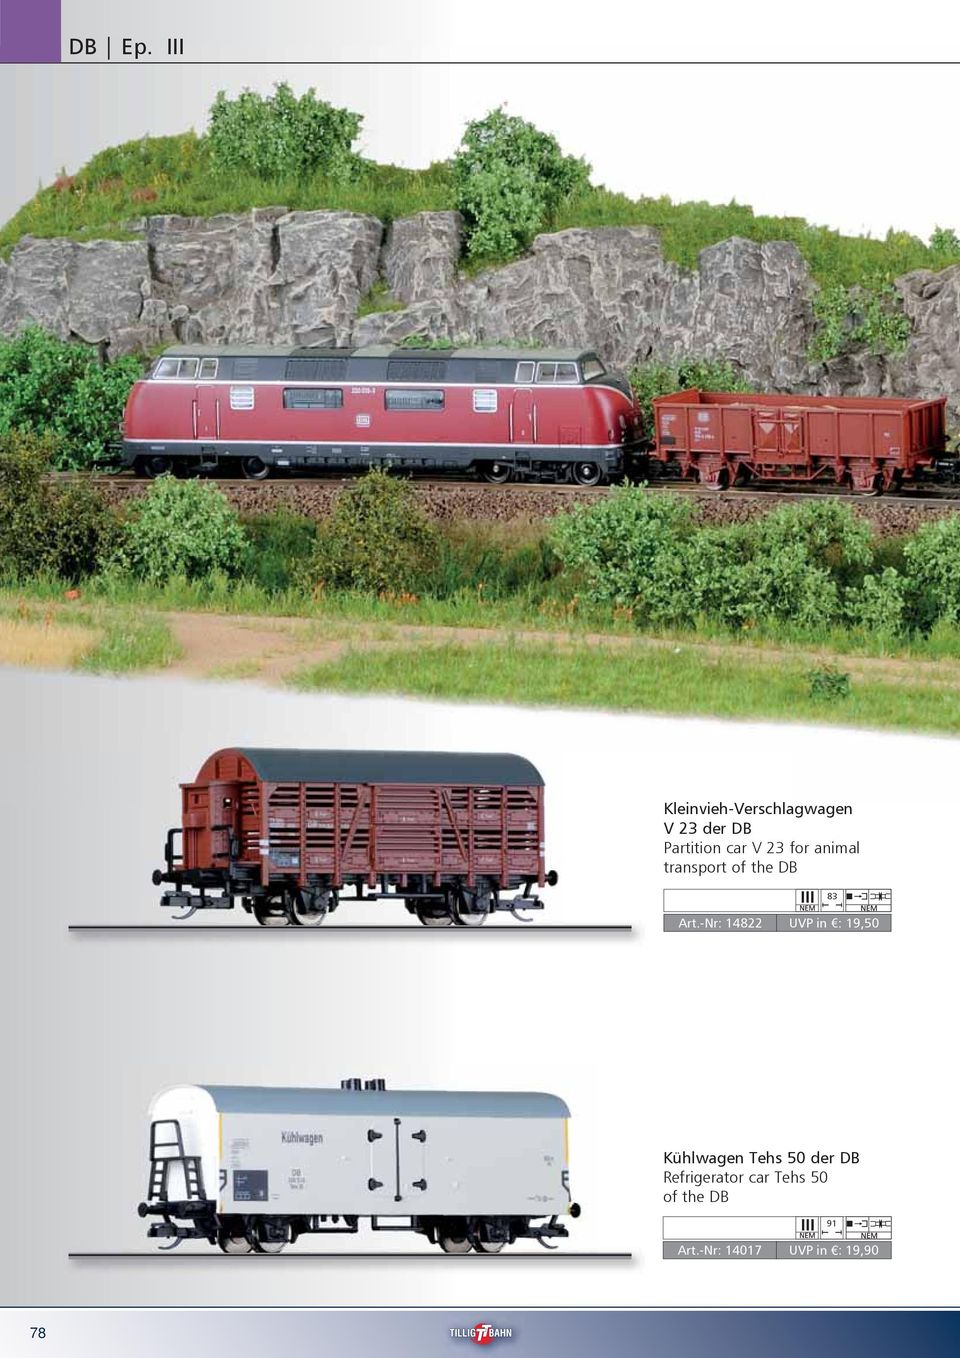 23 for animal transport of the DB 83 Art.